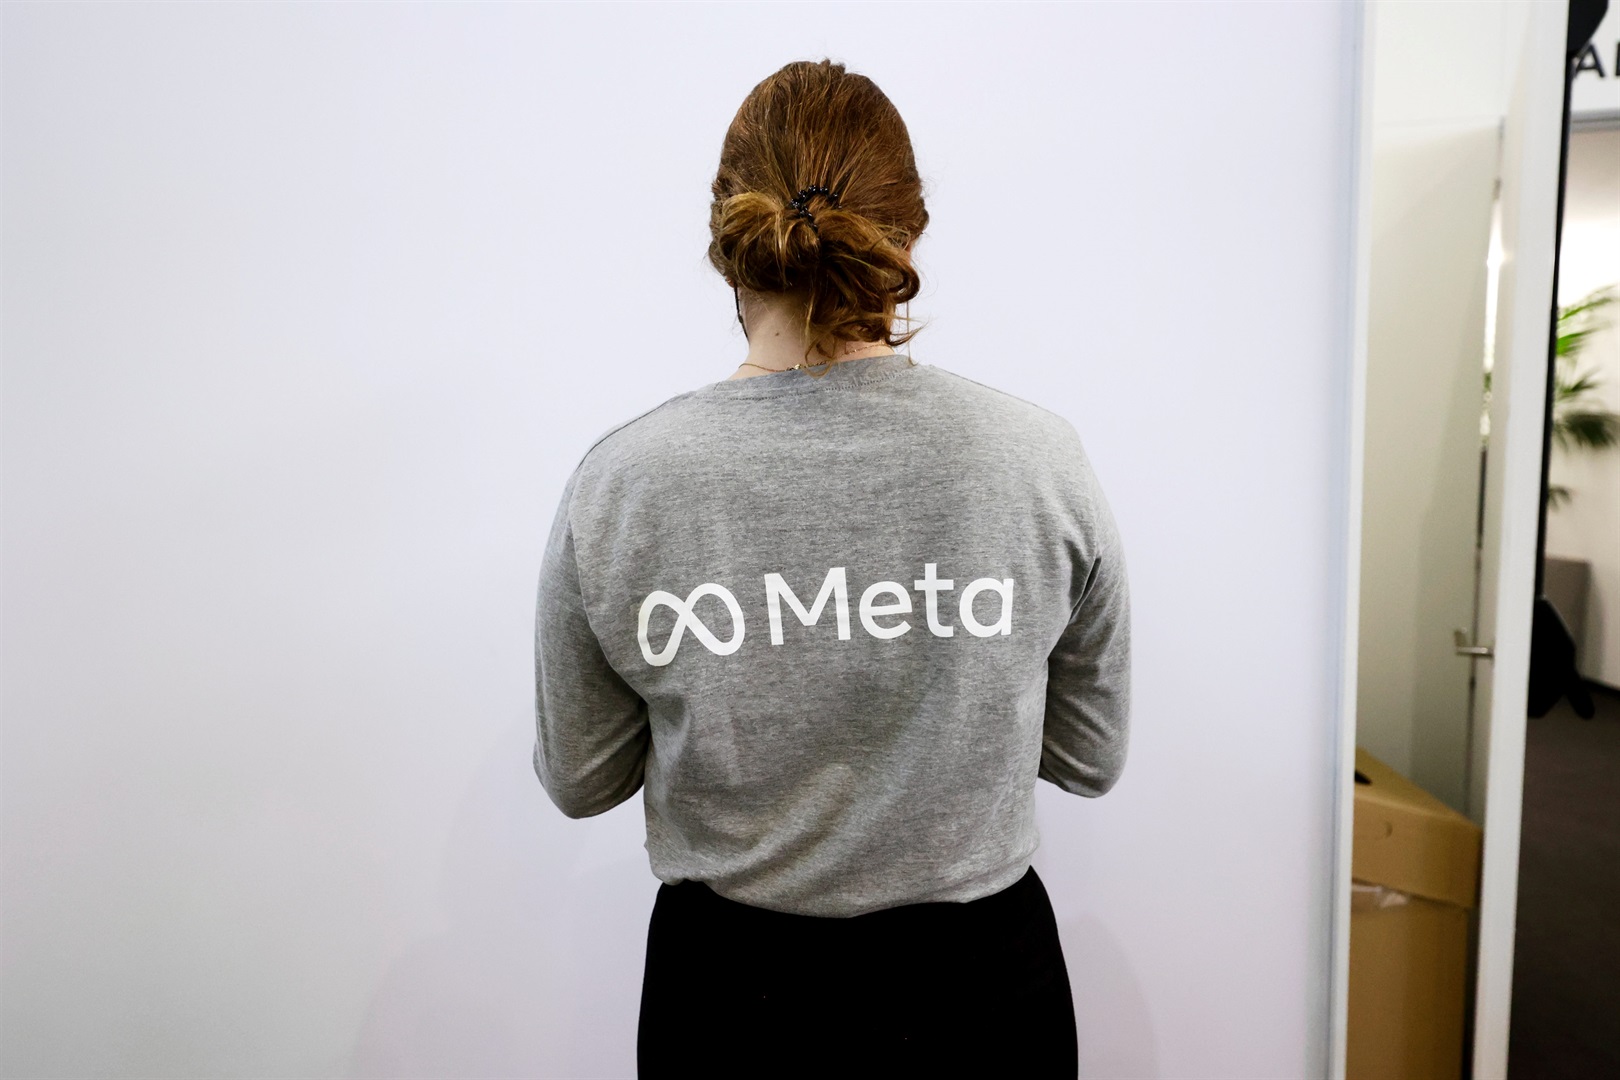 Meta has banned employees from discussing abortion